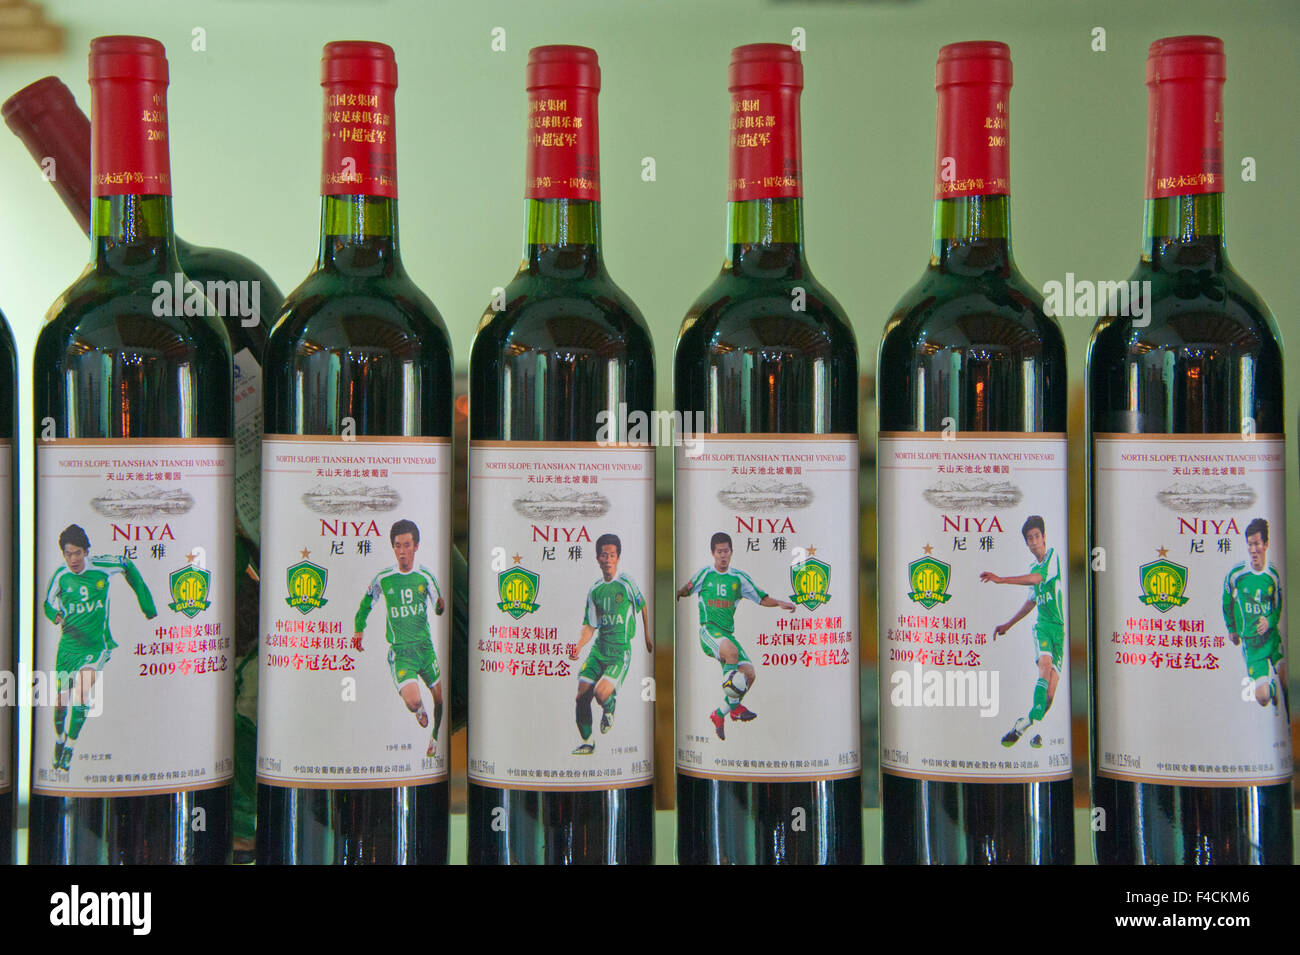 China, Xinjiang, Manas. Bottles of Niya wine labeled with famous Chinese soccer players displayed at Citic Guoan Winery. Stock Photo